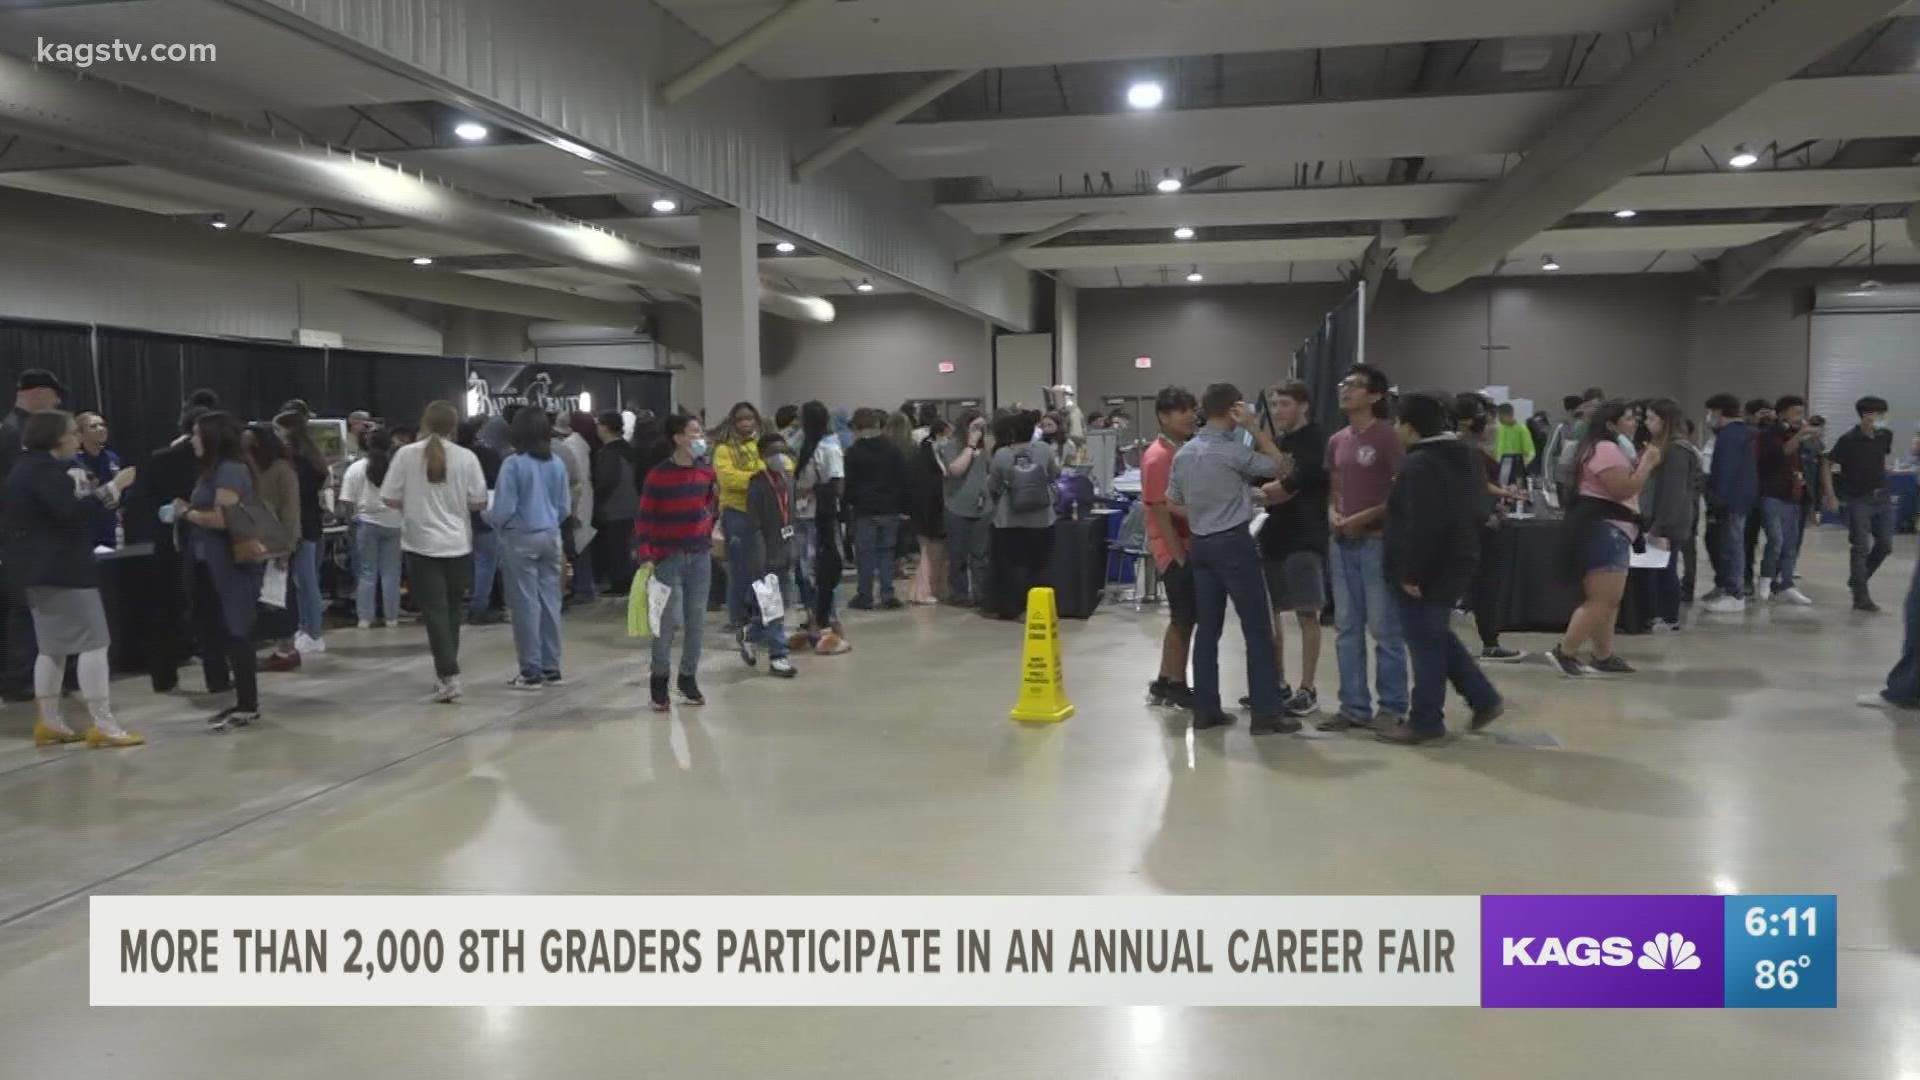 8th graders were exposed to 45 job opportunities during the event